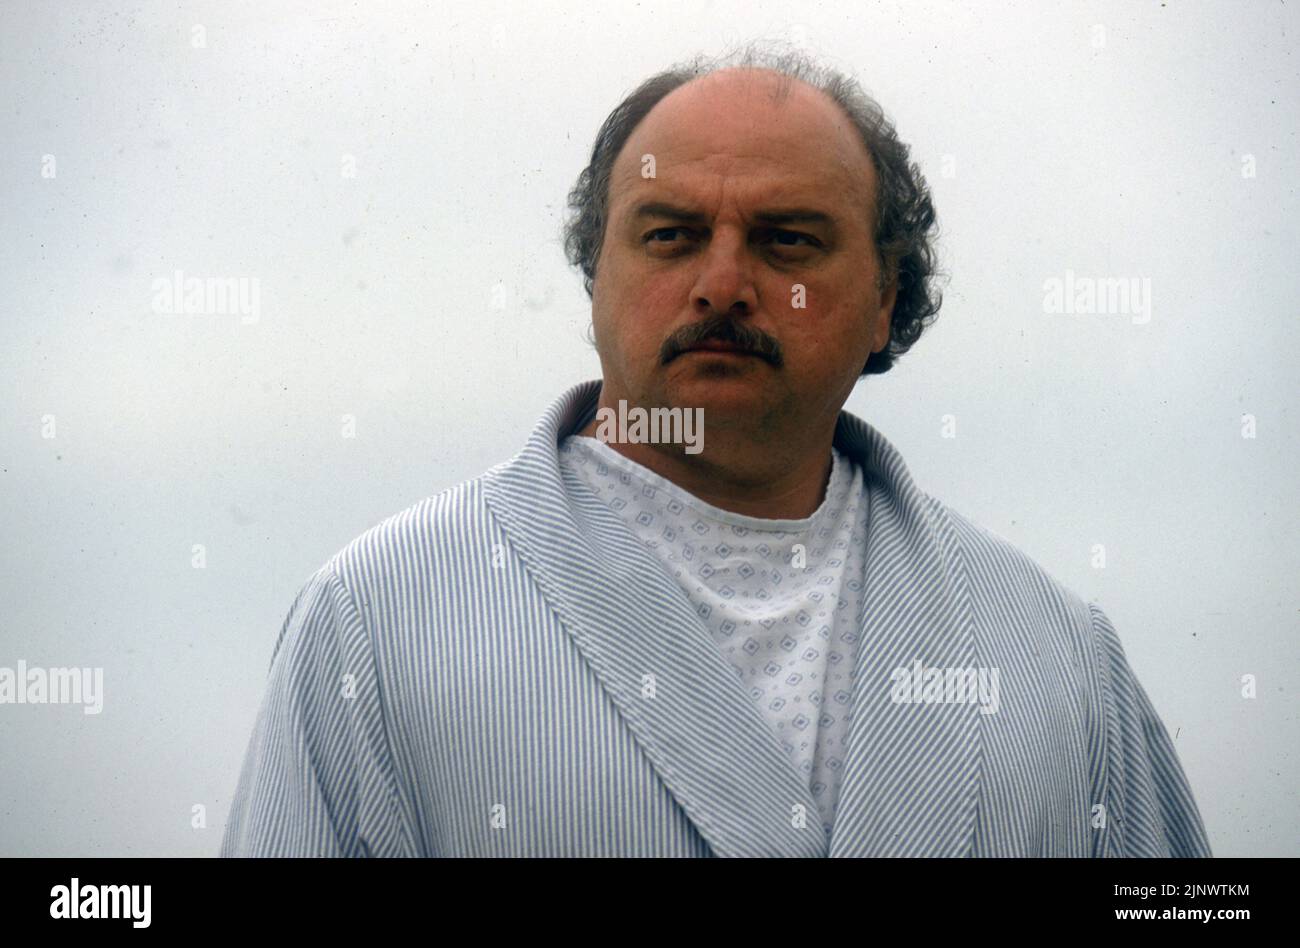 DENNIS FRANZ in CITY OF ANGELS (1998), directed by BRAD SILBERLING. Credit: WARNER BROS. / Album Stock Photo